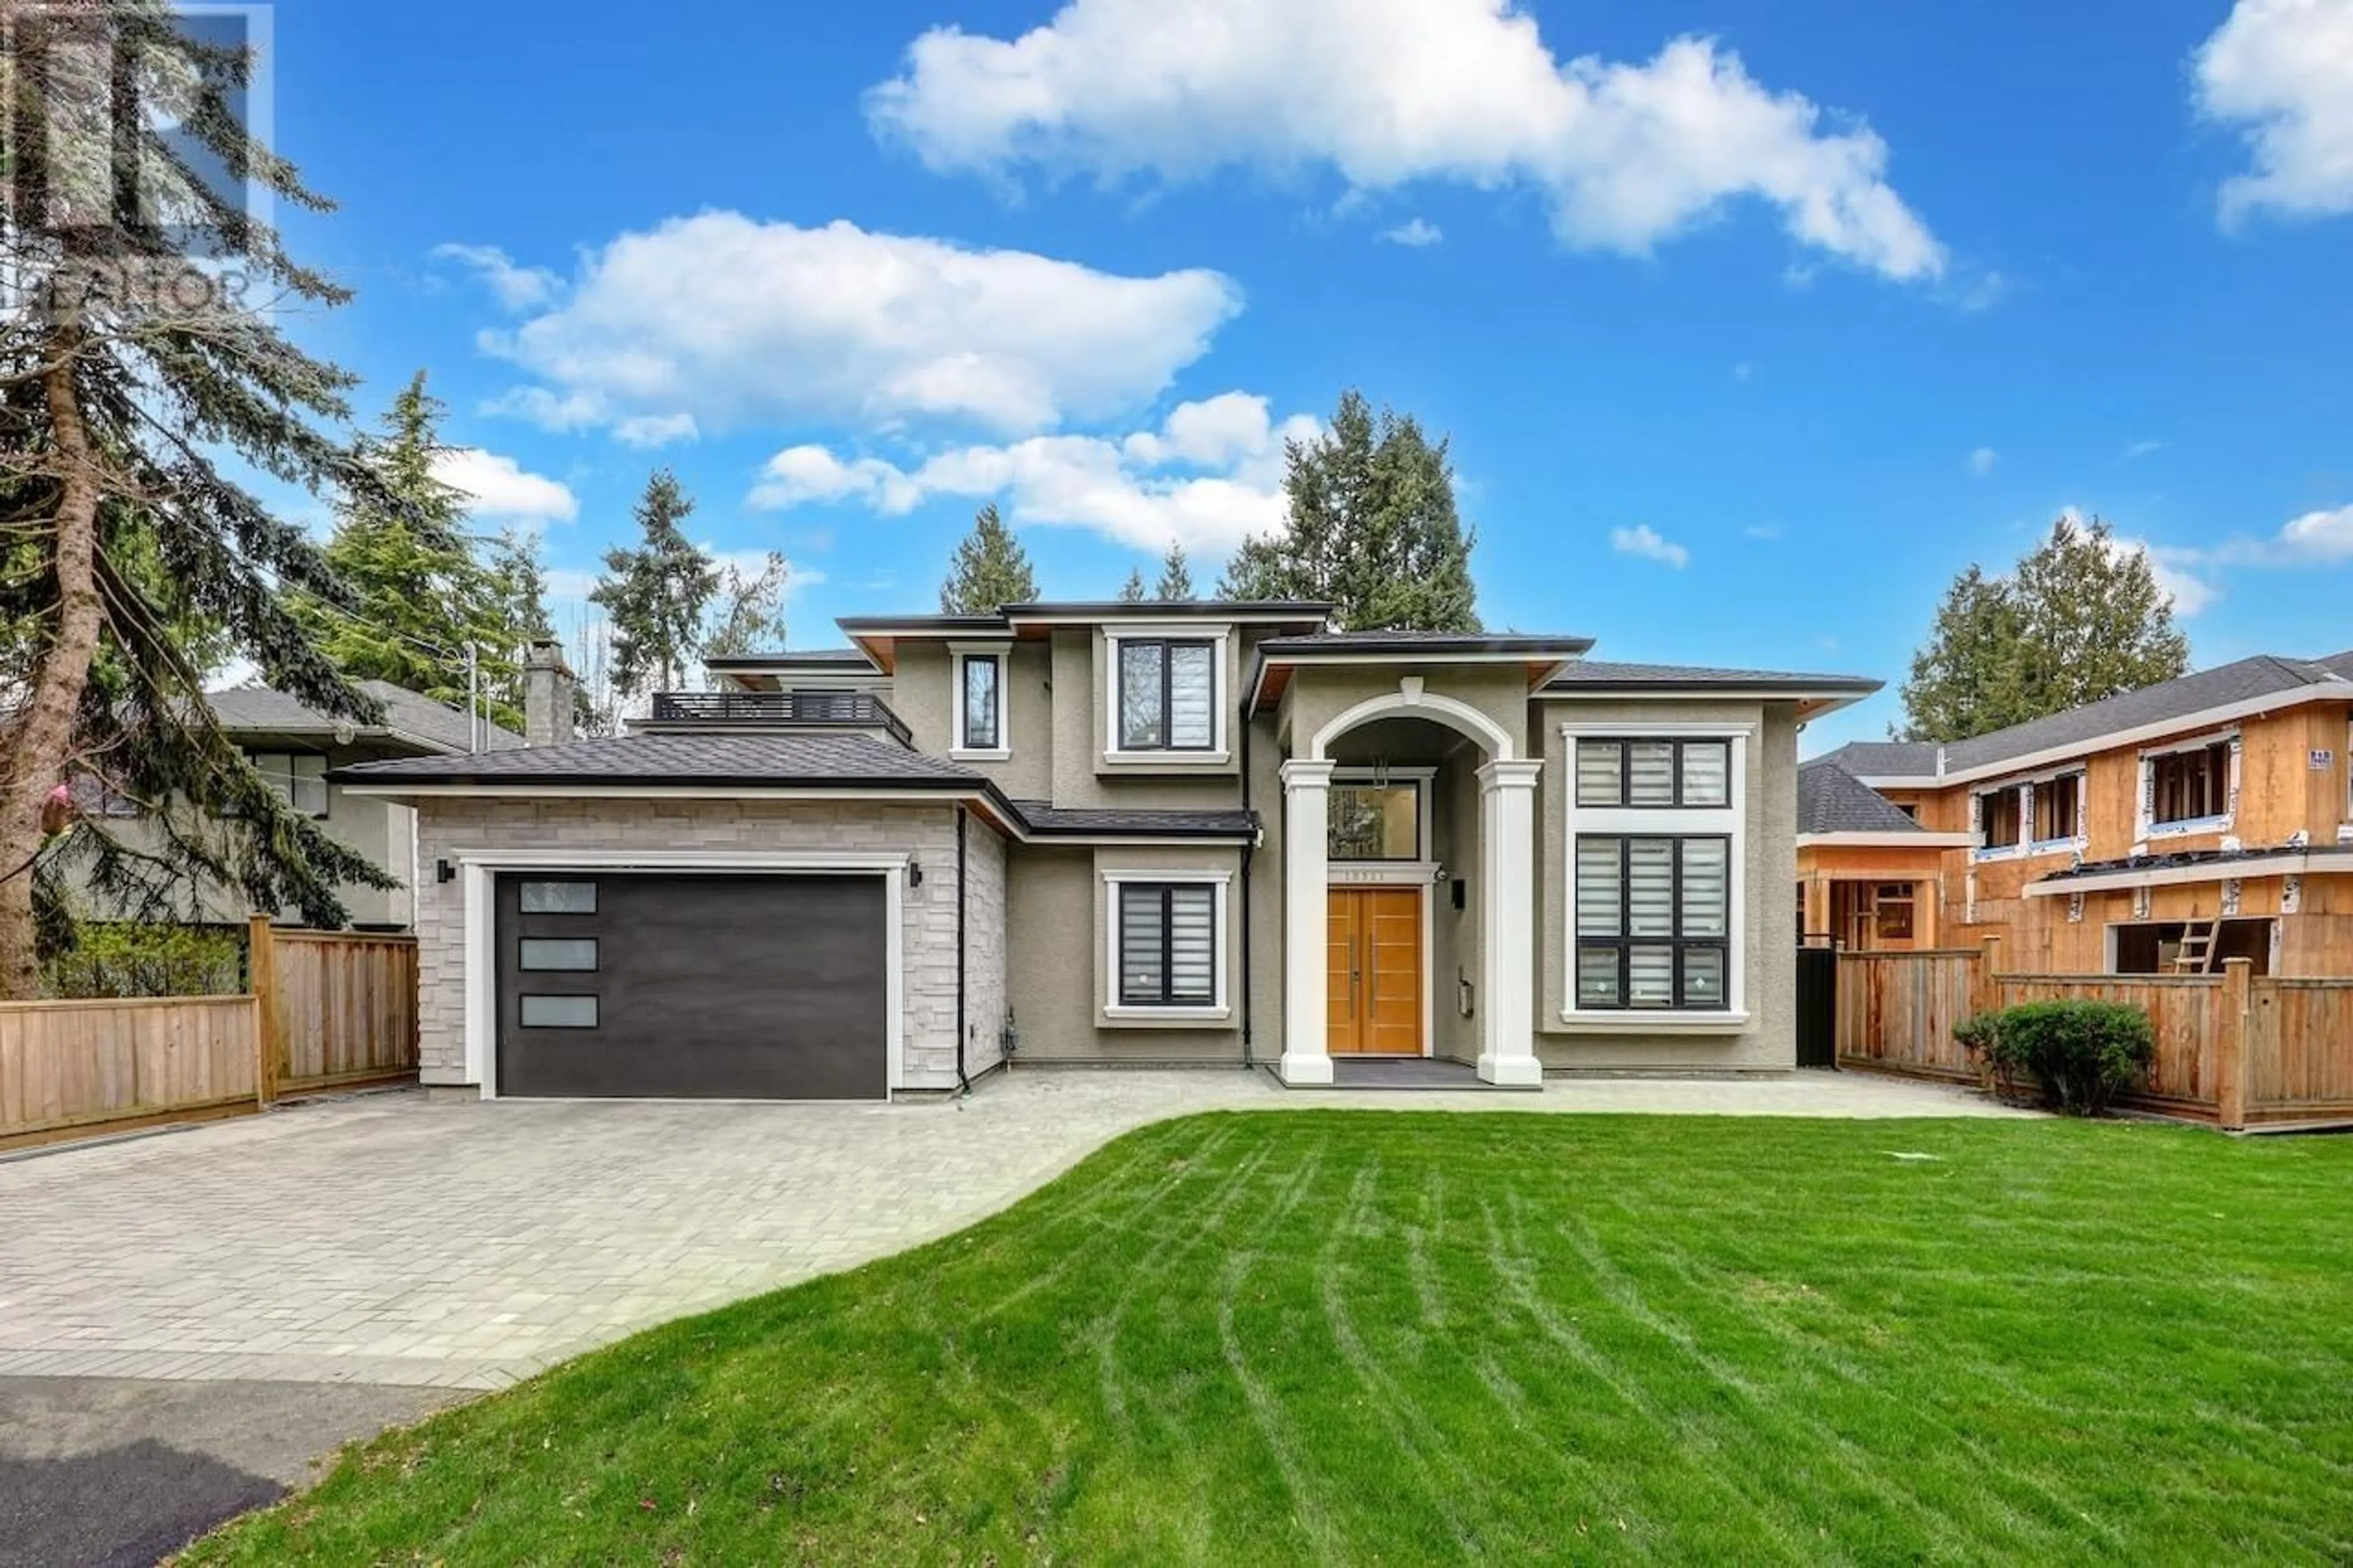 Home with vinyl exterior material for 10311 CAITHCART ROAD, Richmond British Columbia V6X1N3